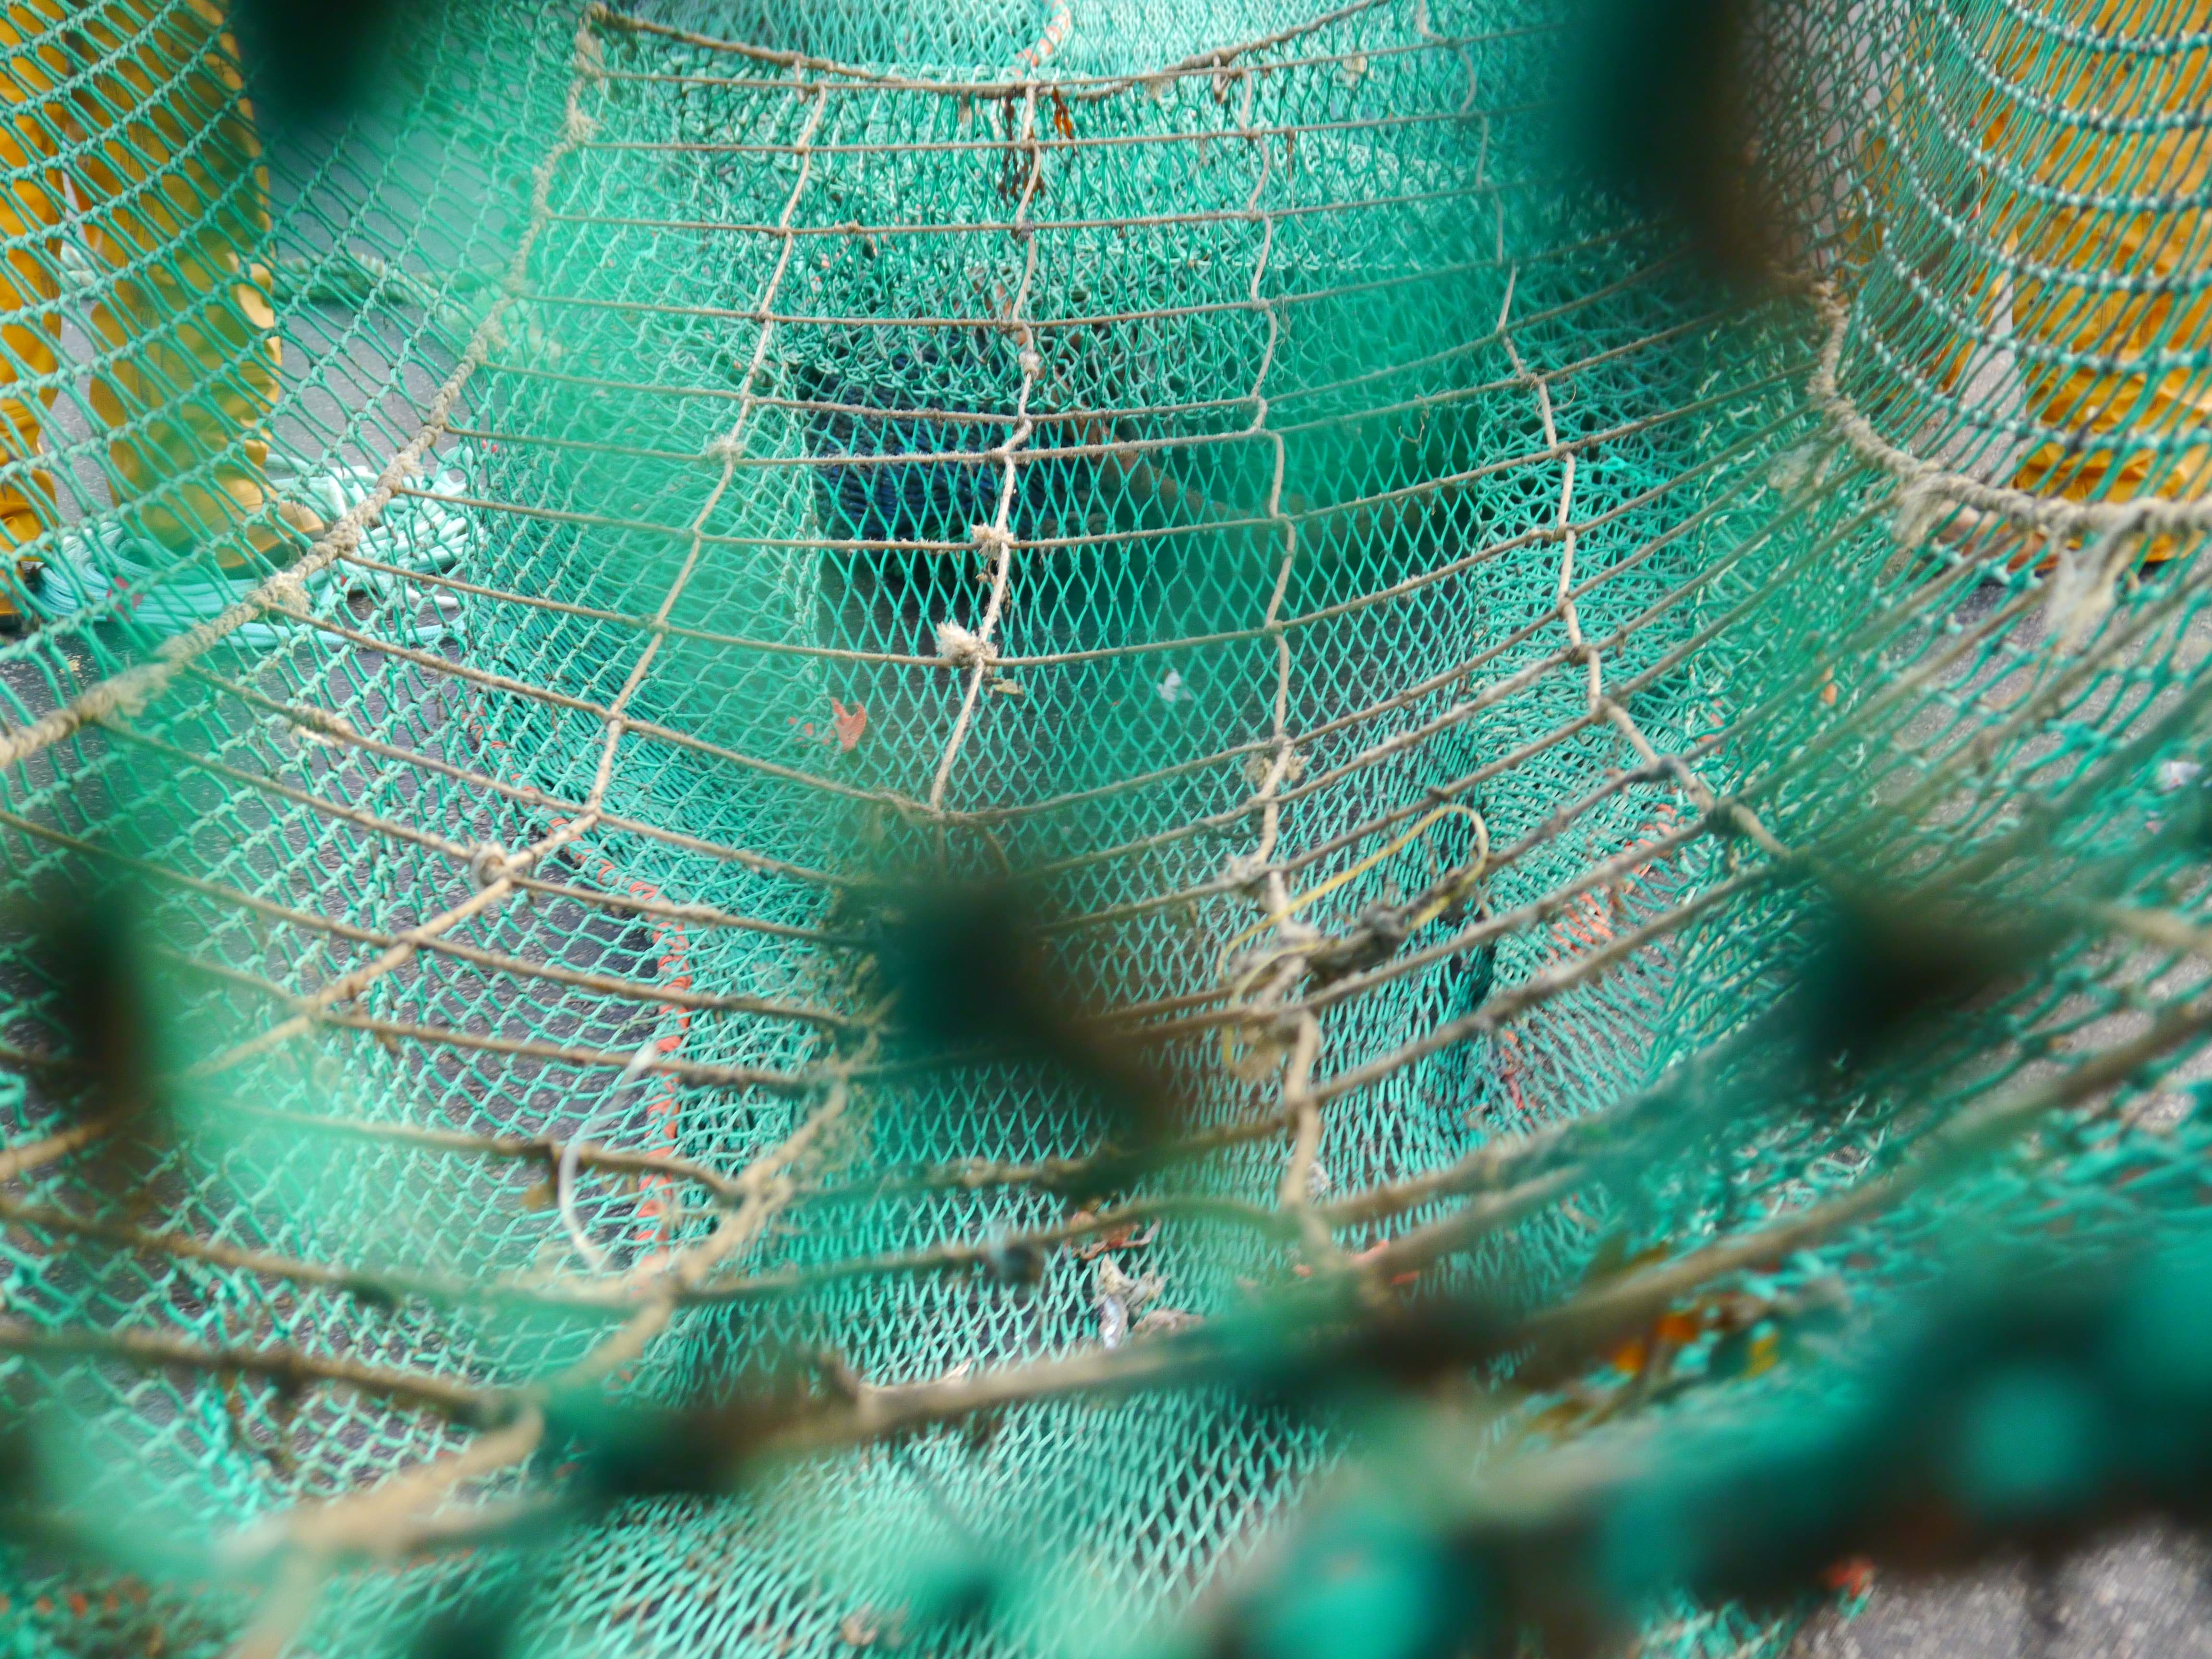 Close up of Amity Net Grid on land, showing the mesh inclined square panel inside the net